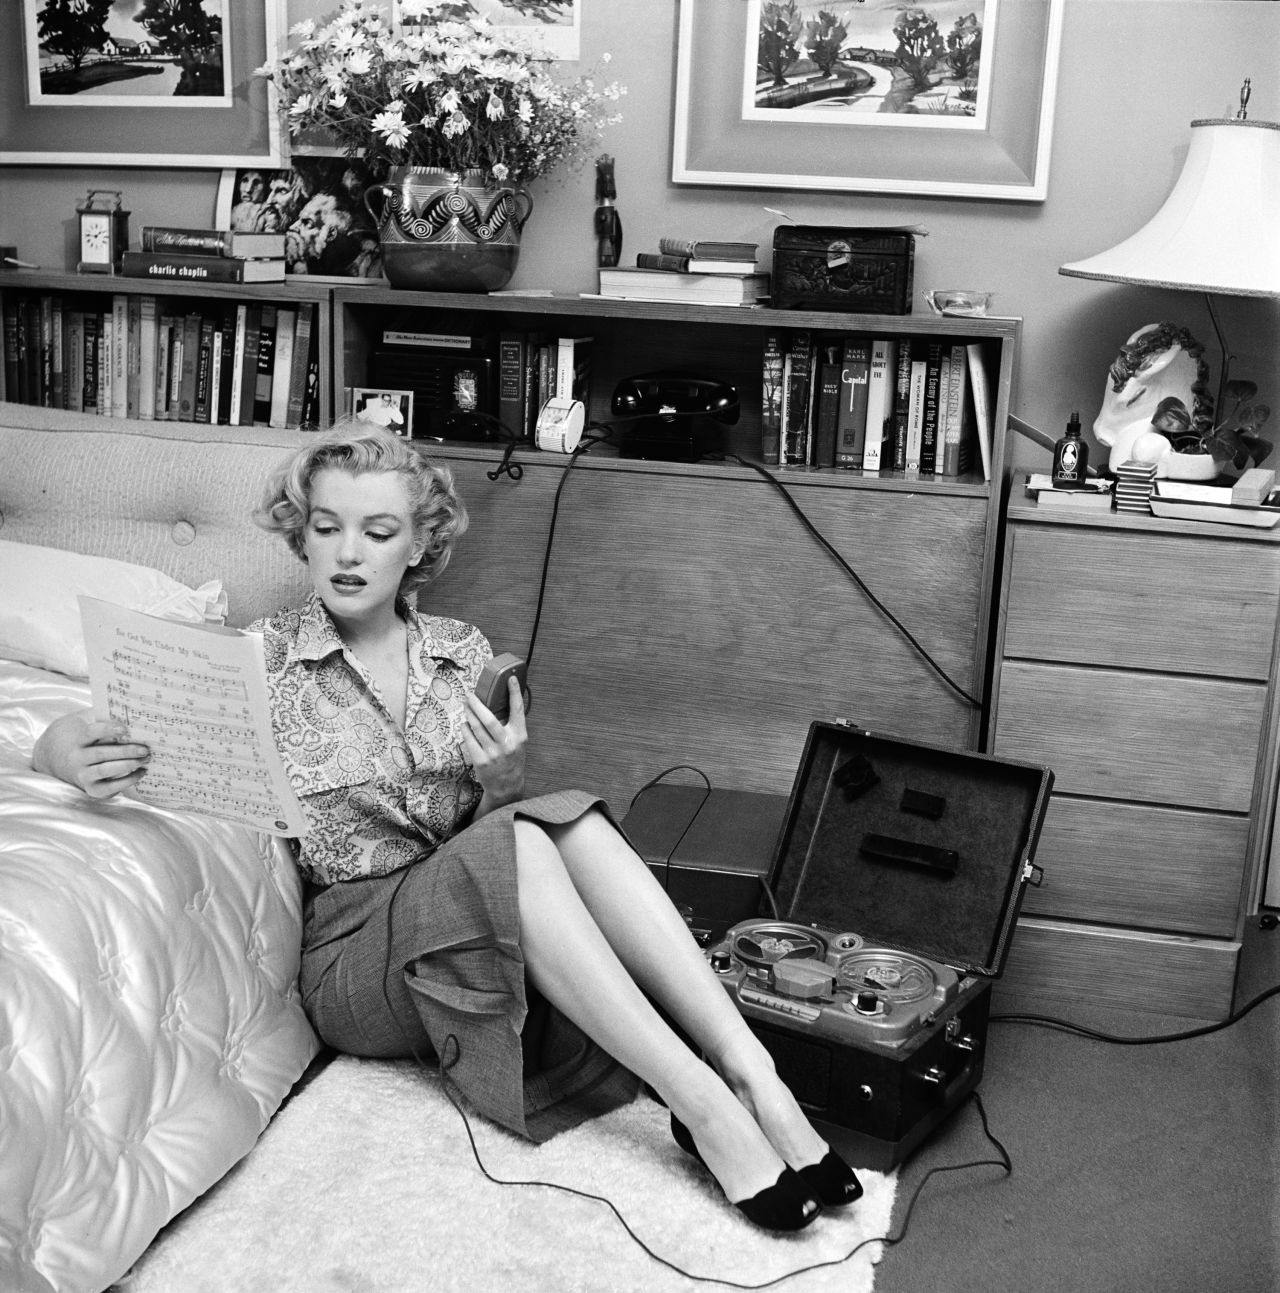 She was in several movies in 1950, including "The Asphalt Jungle" and "All About Eve." Seen here, Monroe is reading sheet music while sitting on a bedroom floor with a tape player on her side.